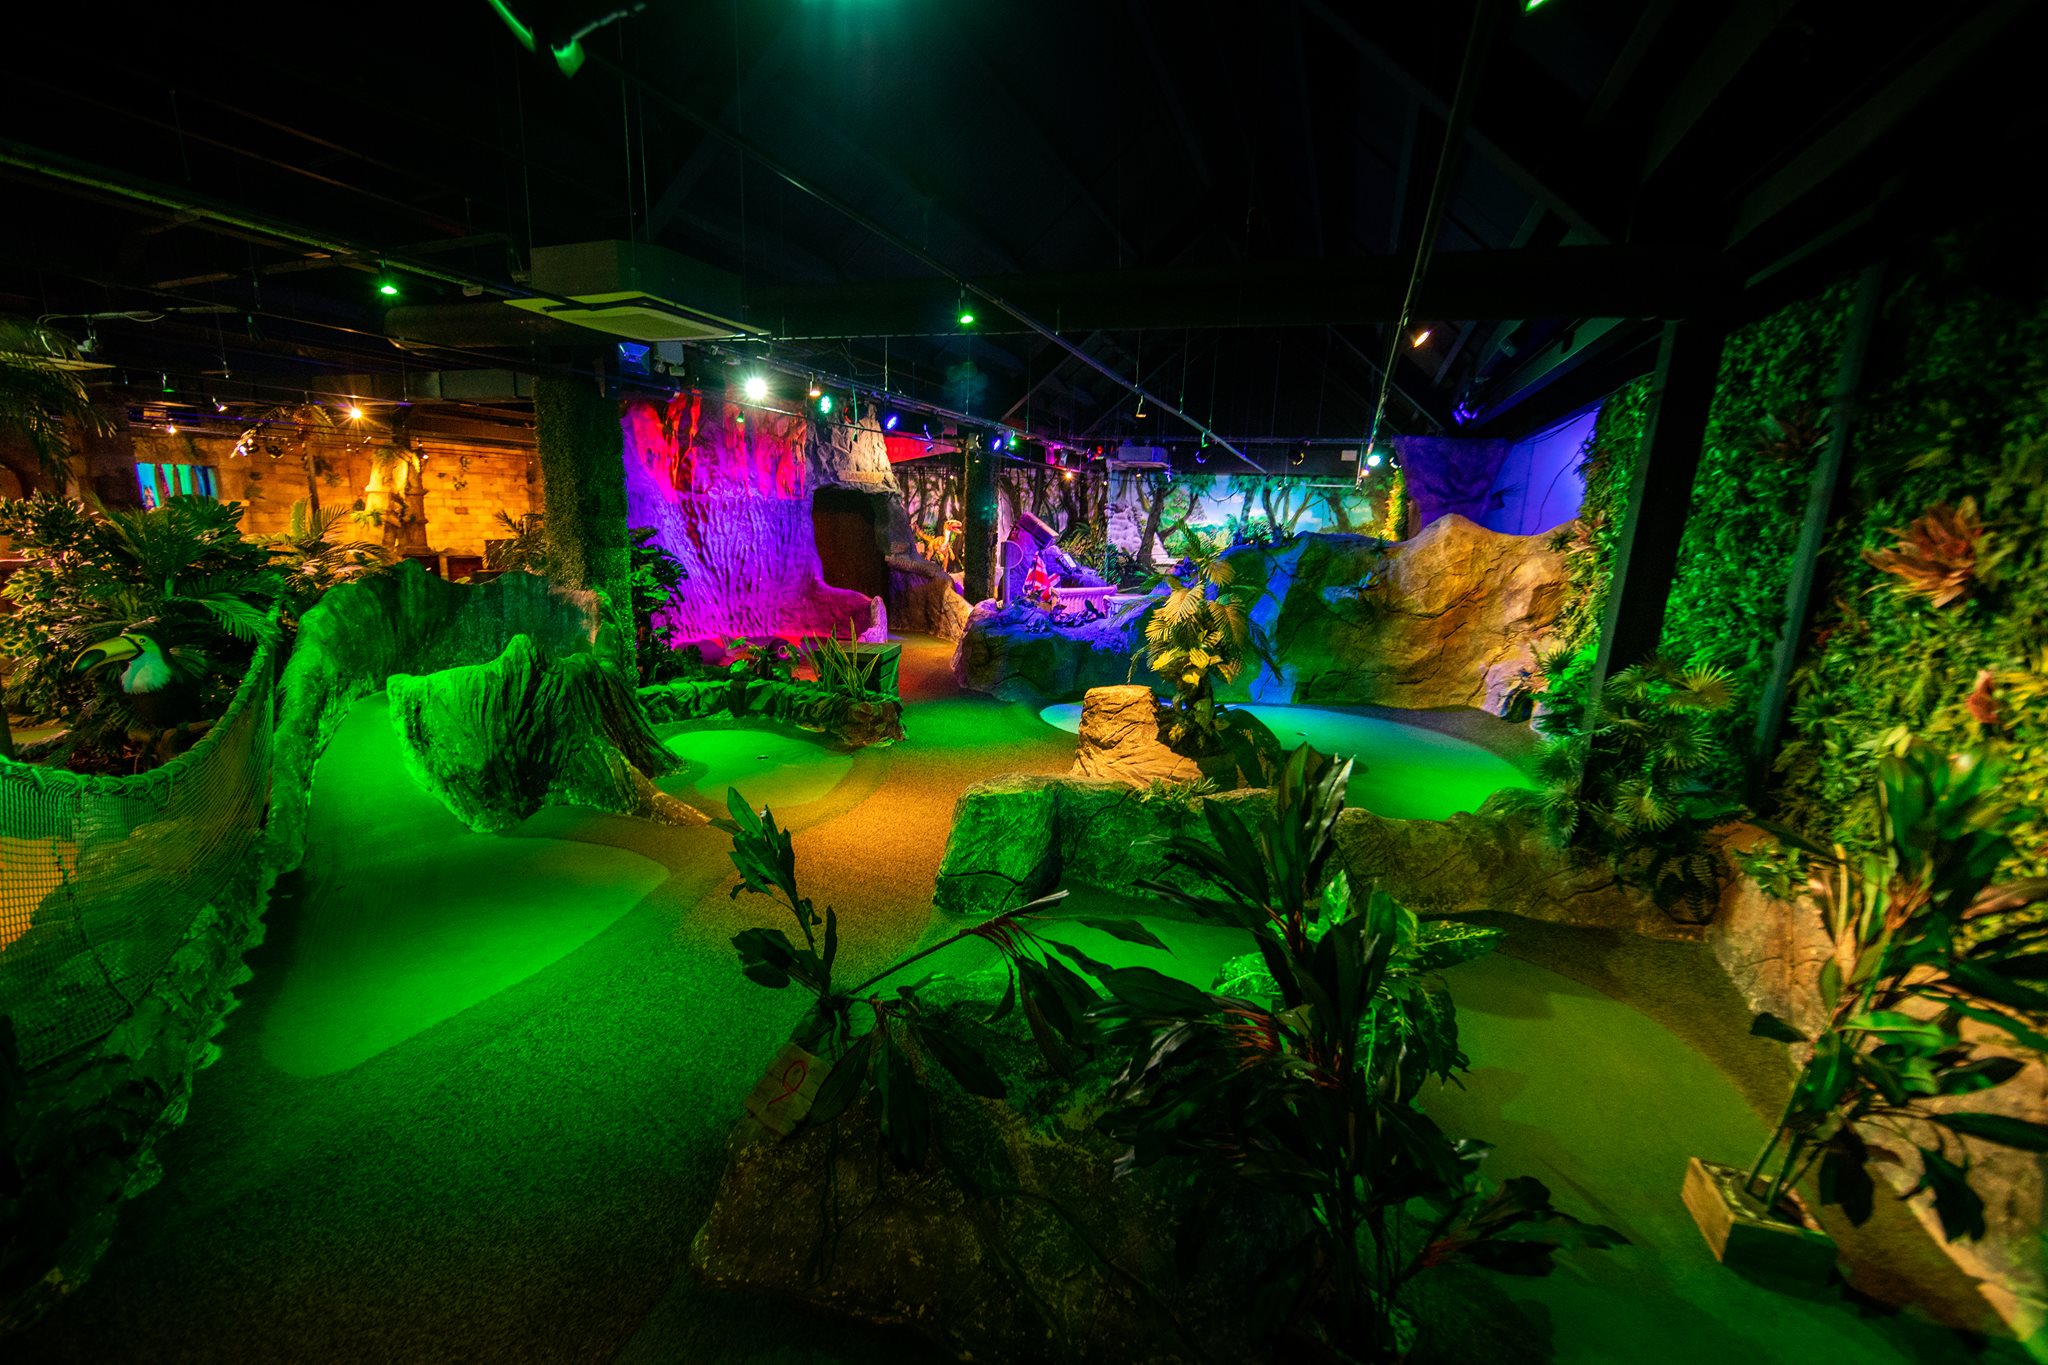 NEWS | Mulligans to open a Crazy Golf, Electro-Darts, Ping Pong, Pool, Bar and Restaurant centre in Worcester this summer